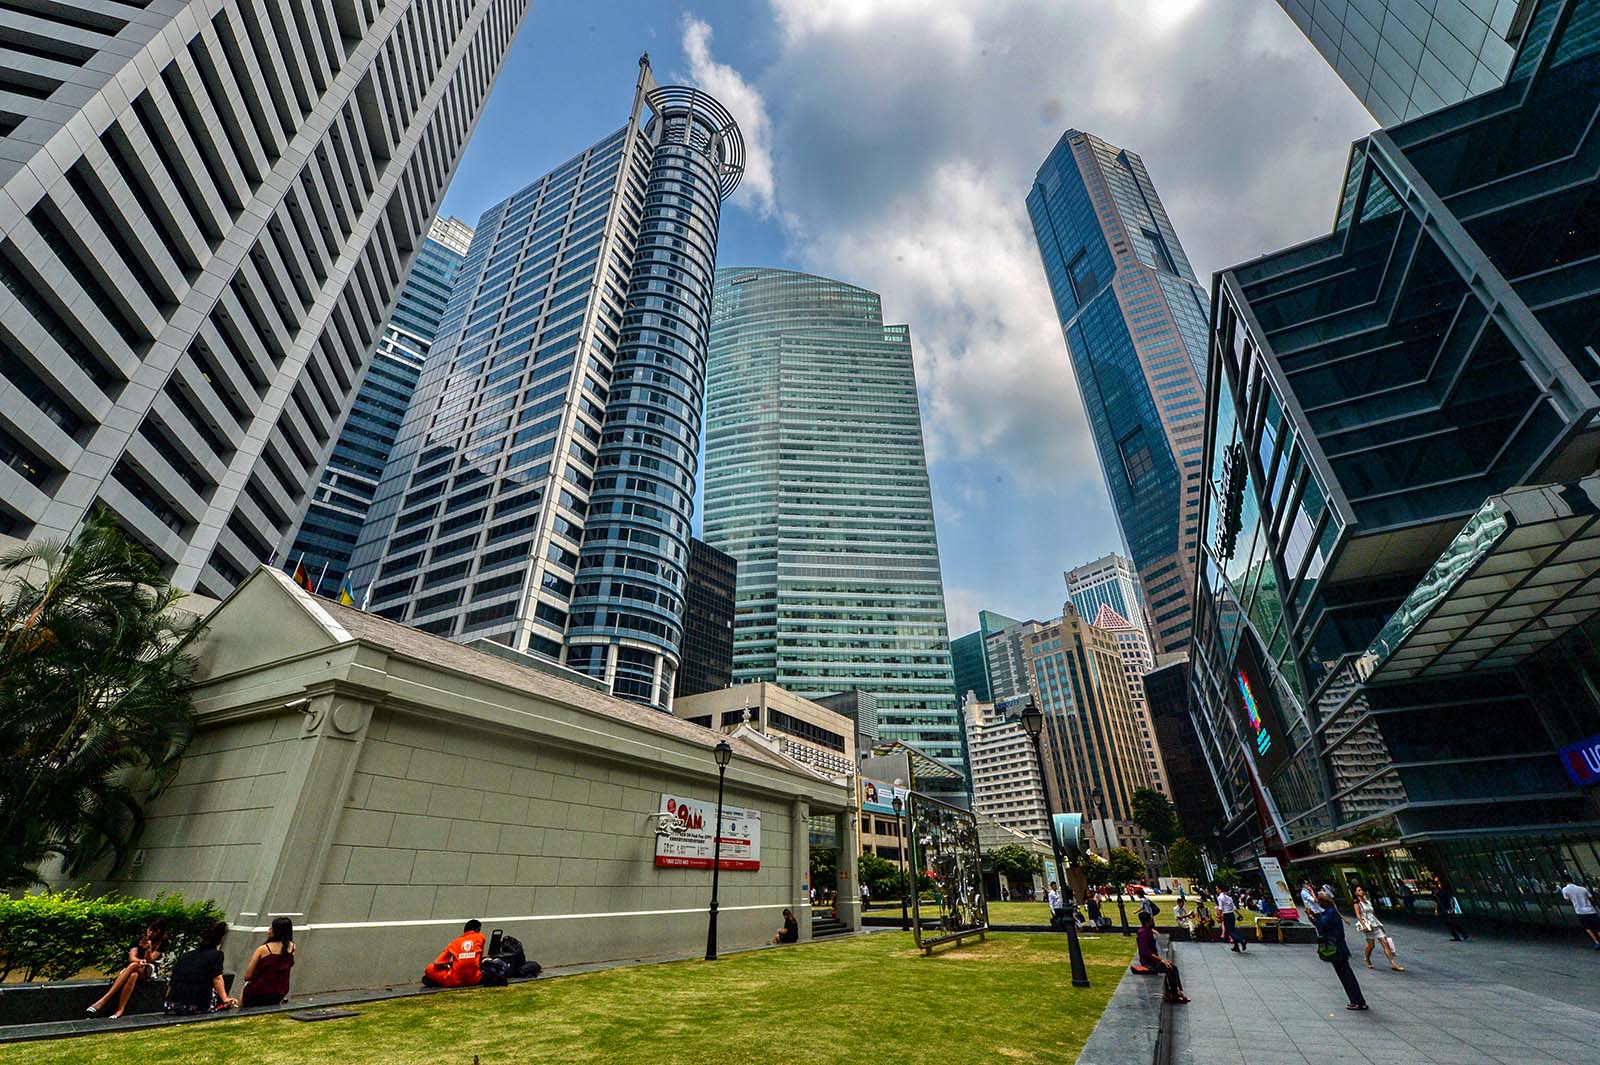 Capital of songapore